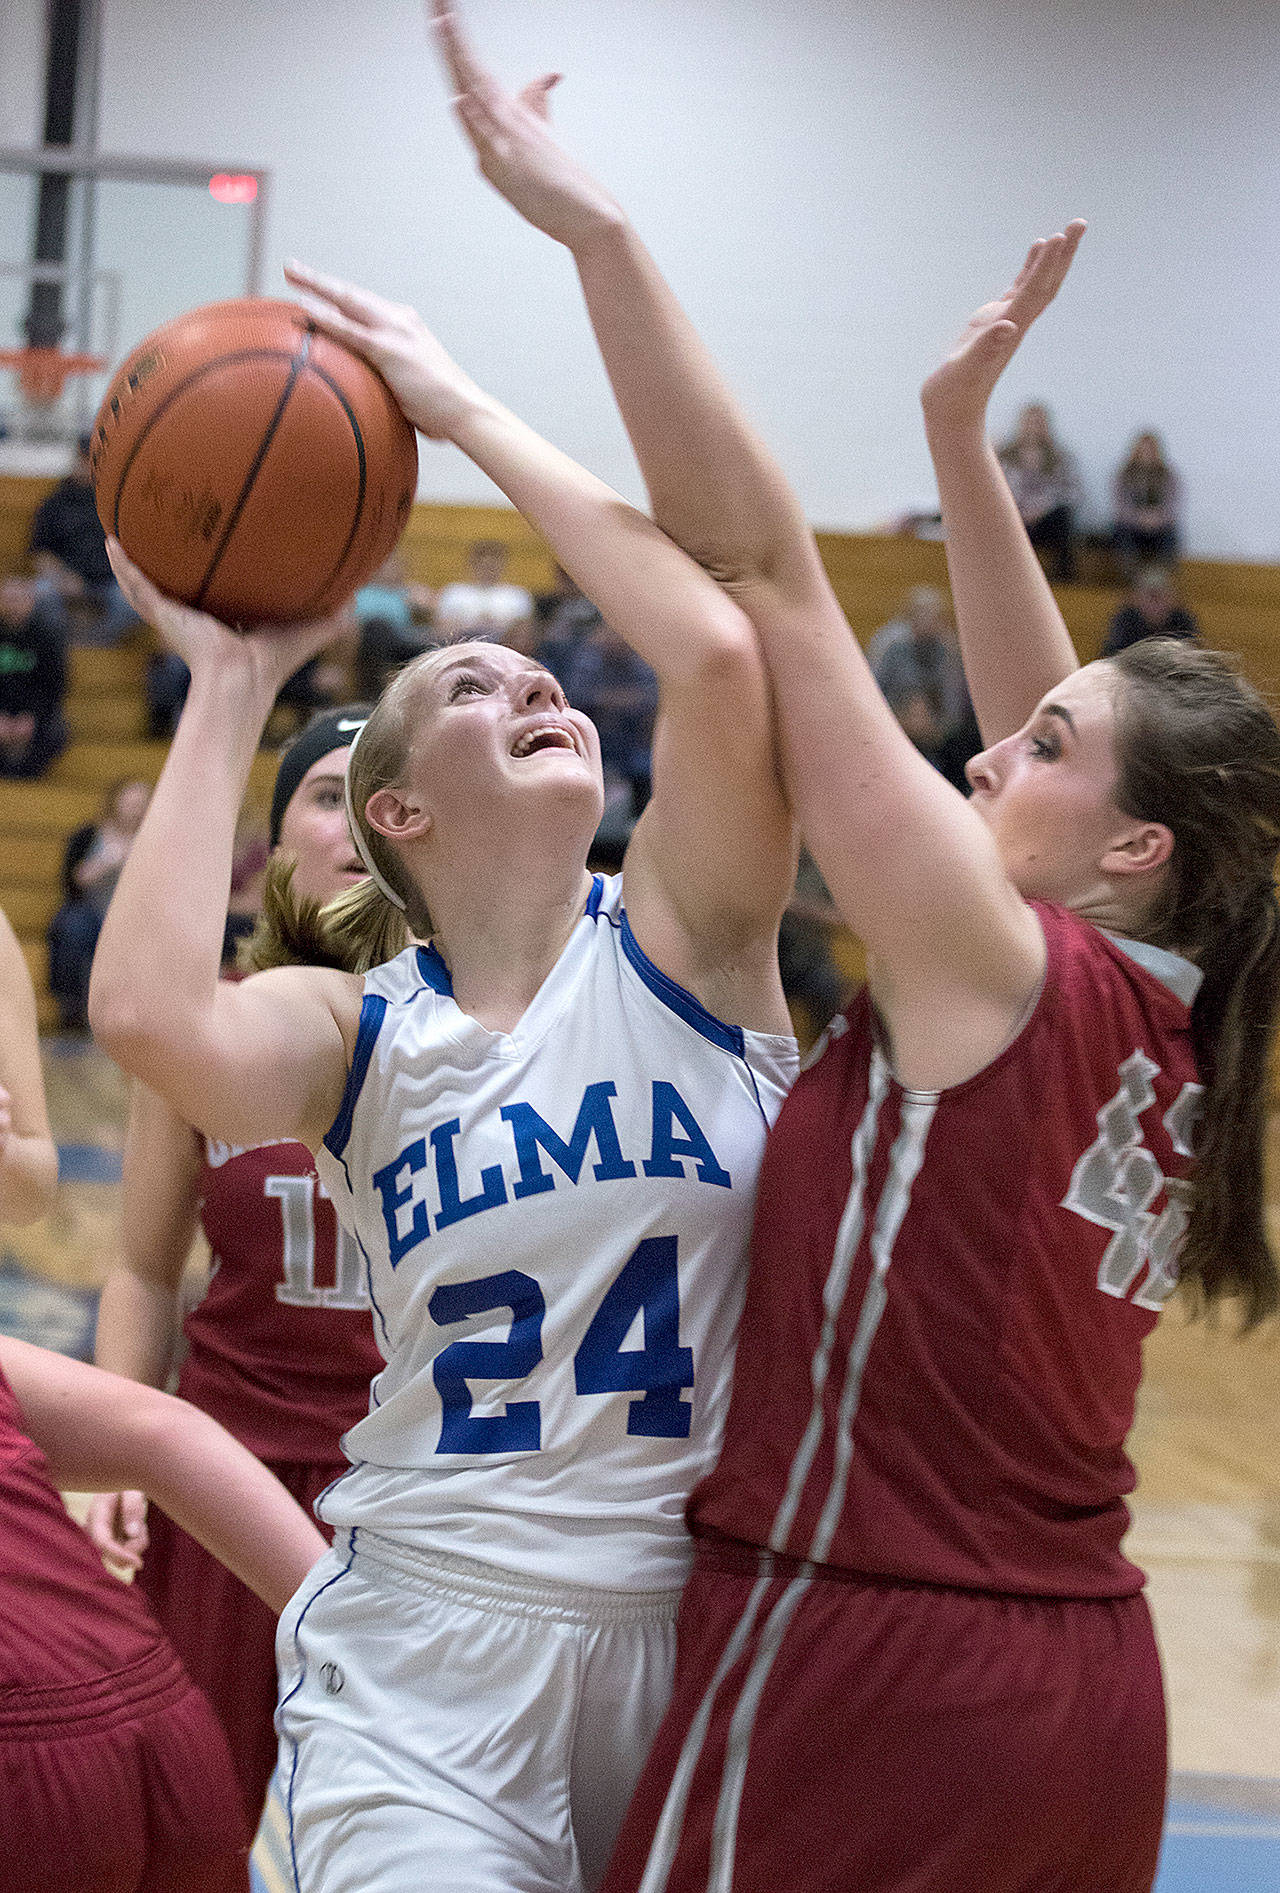 Elma’s girls are 14-0 for the season